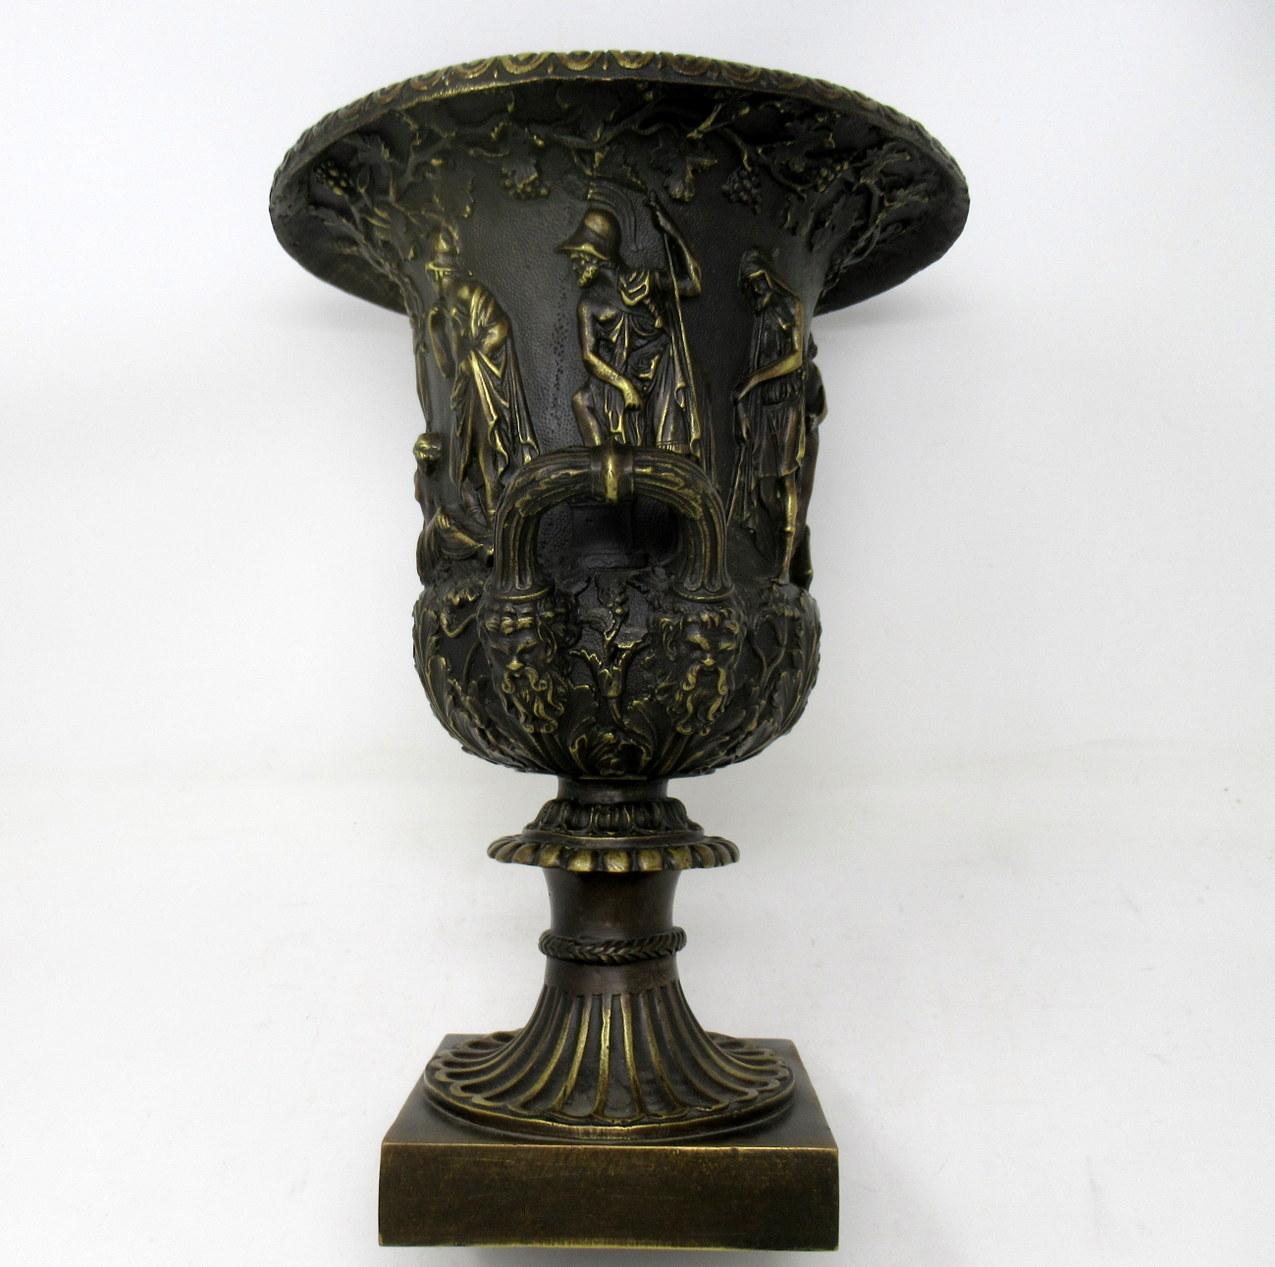 20th Century Antique Pair of Grand Tour Style Borghese or Medici Bronze Campana Urns Vases